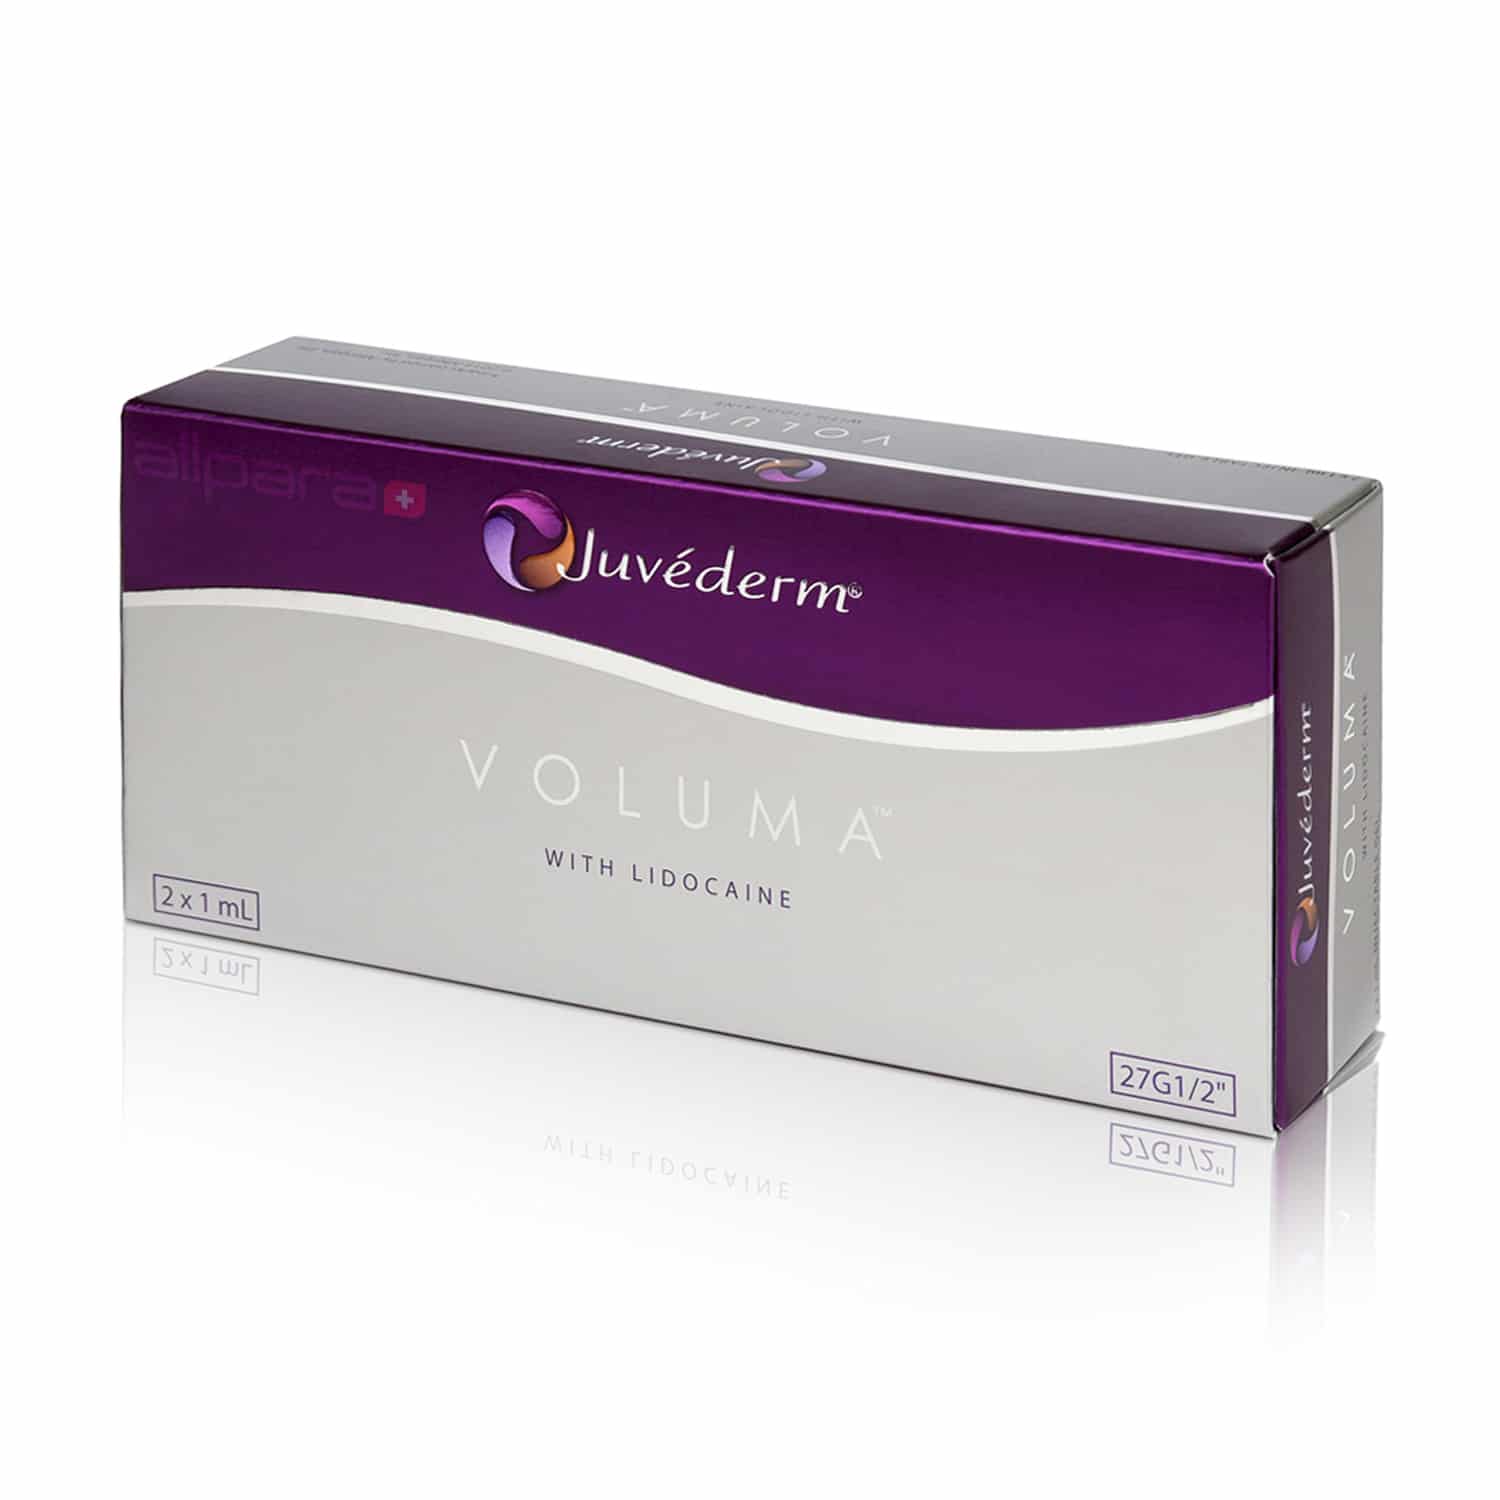 image of a box of Juvederm Voluma dermal filler, available at Spring Street Dermatology in NYC